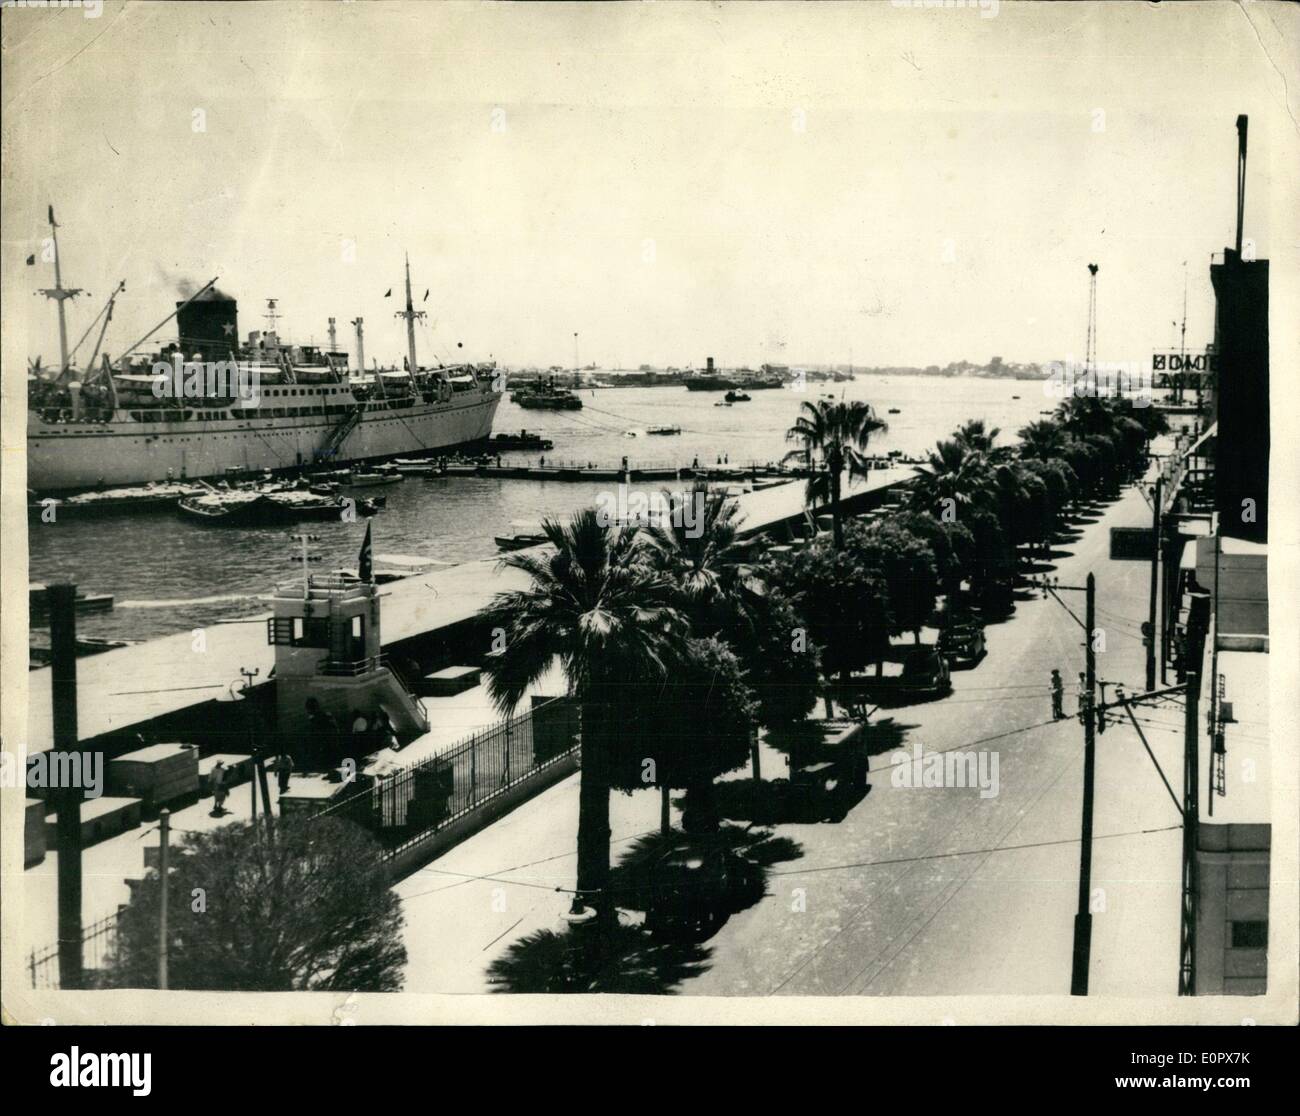 Apr. 04, 1957 - The Suez Canal is clear at Lt. Nine ships pass Through : The Suez Canal is now clear and  opened to ships of 30ft. draft - i.e. up to about 20,000 tons. A convoy of nine ships belonging to five different shipping compa passed in advance in accordance with the Suez Canal Authority regulations. Photo shows One of the nine ships passing through the Suez Canal. Stock Photo